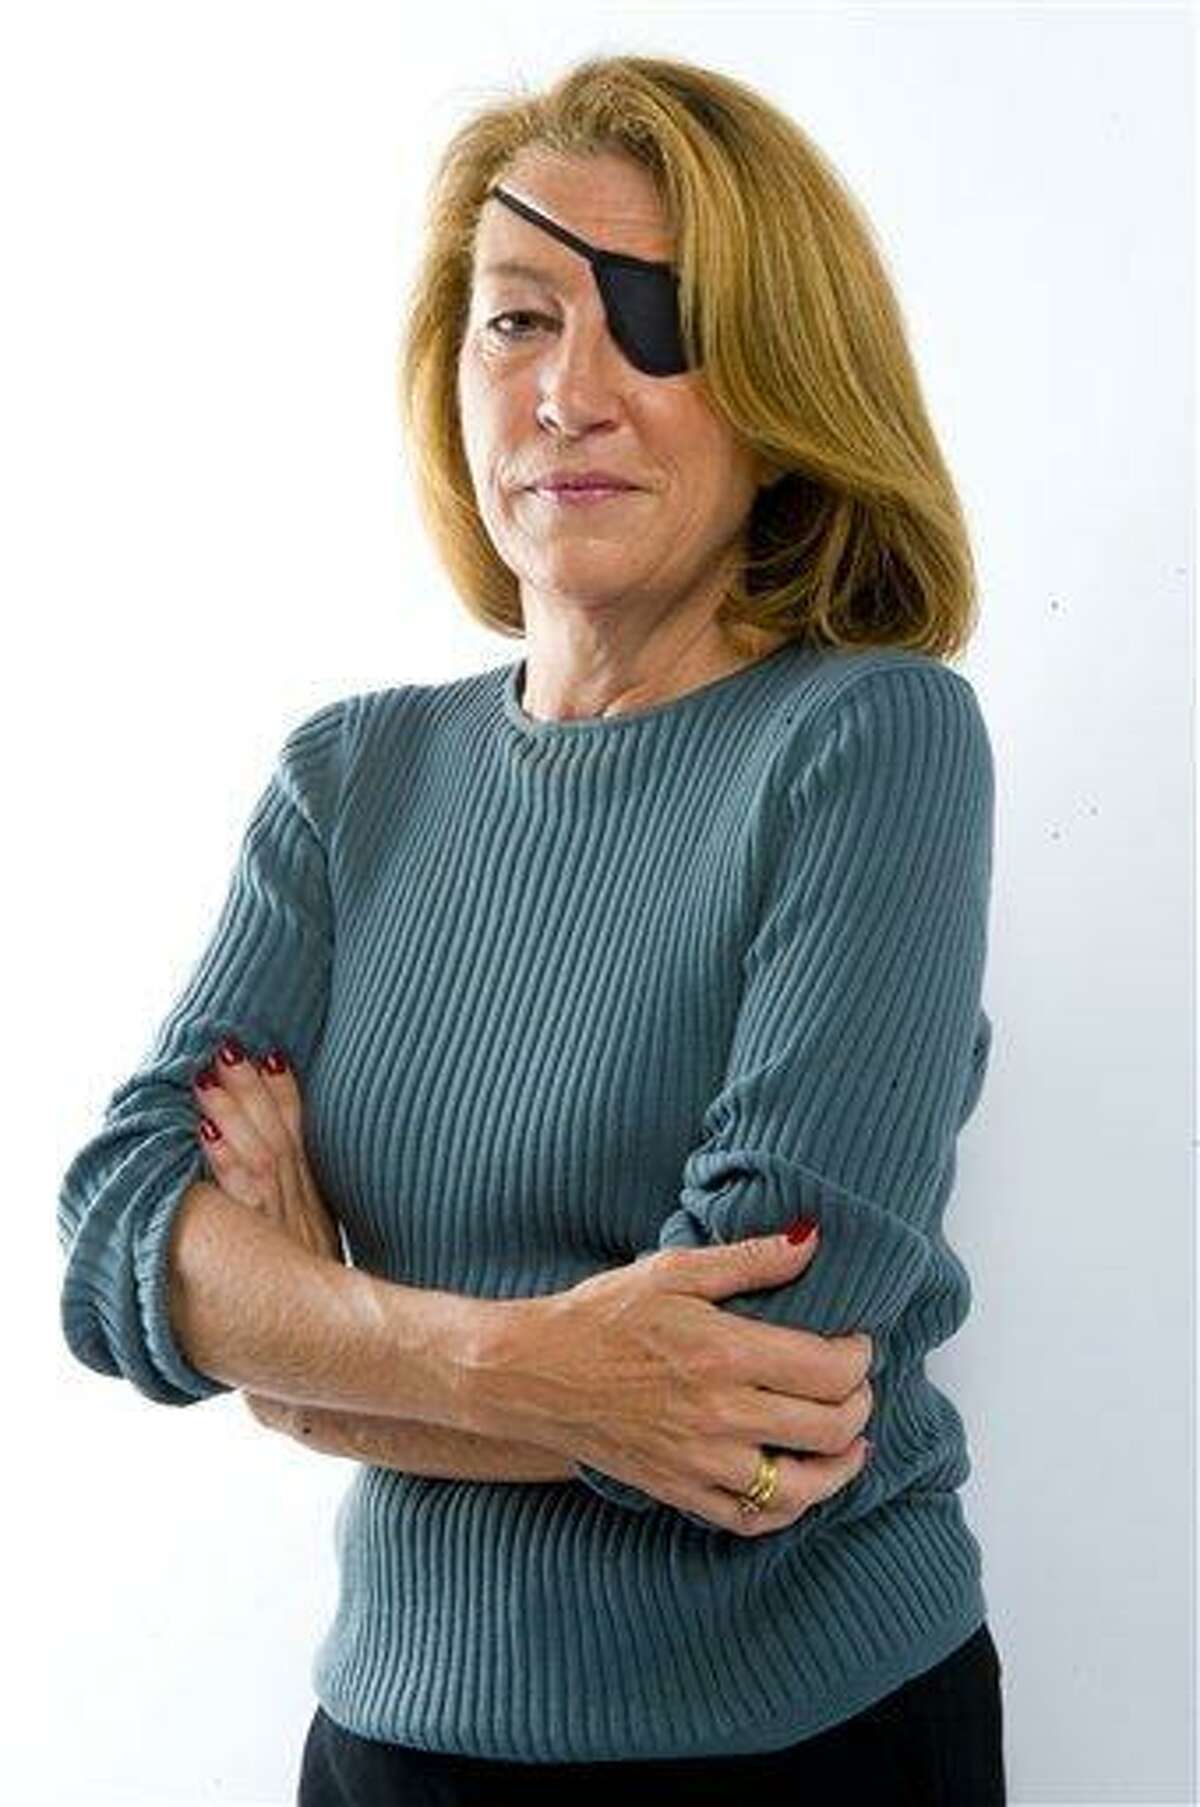 This is an undated image made available Wednesday by the Sunday Times in London of journalist Marie Colvin. A French government spokeswoman on Wednesday identified two Western reporters killed in Syria as American war reporter Marie Colvin and French photojournalist Remi Ochlik. Colvin, from Oyster Bay, New York, had been a foreign correspondent for Britain's Sunday Times for two decades, reporting from the world's most dangerous places. She lost the sight in one eye in Sri Lanka in 2001 but did not let that deter her. Associated Press